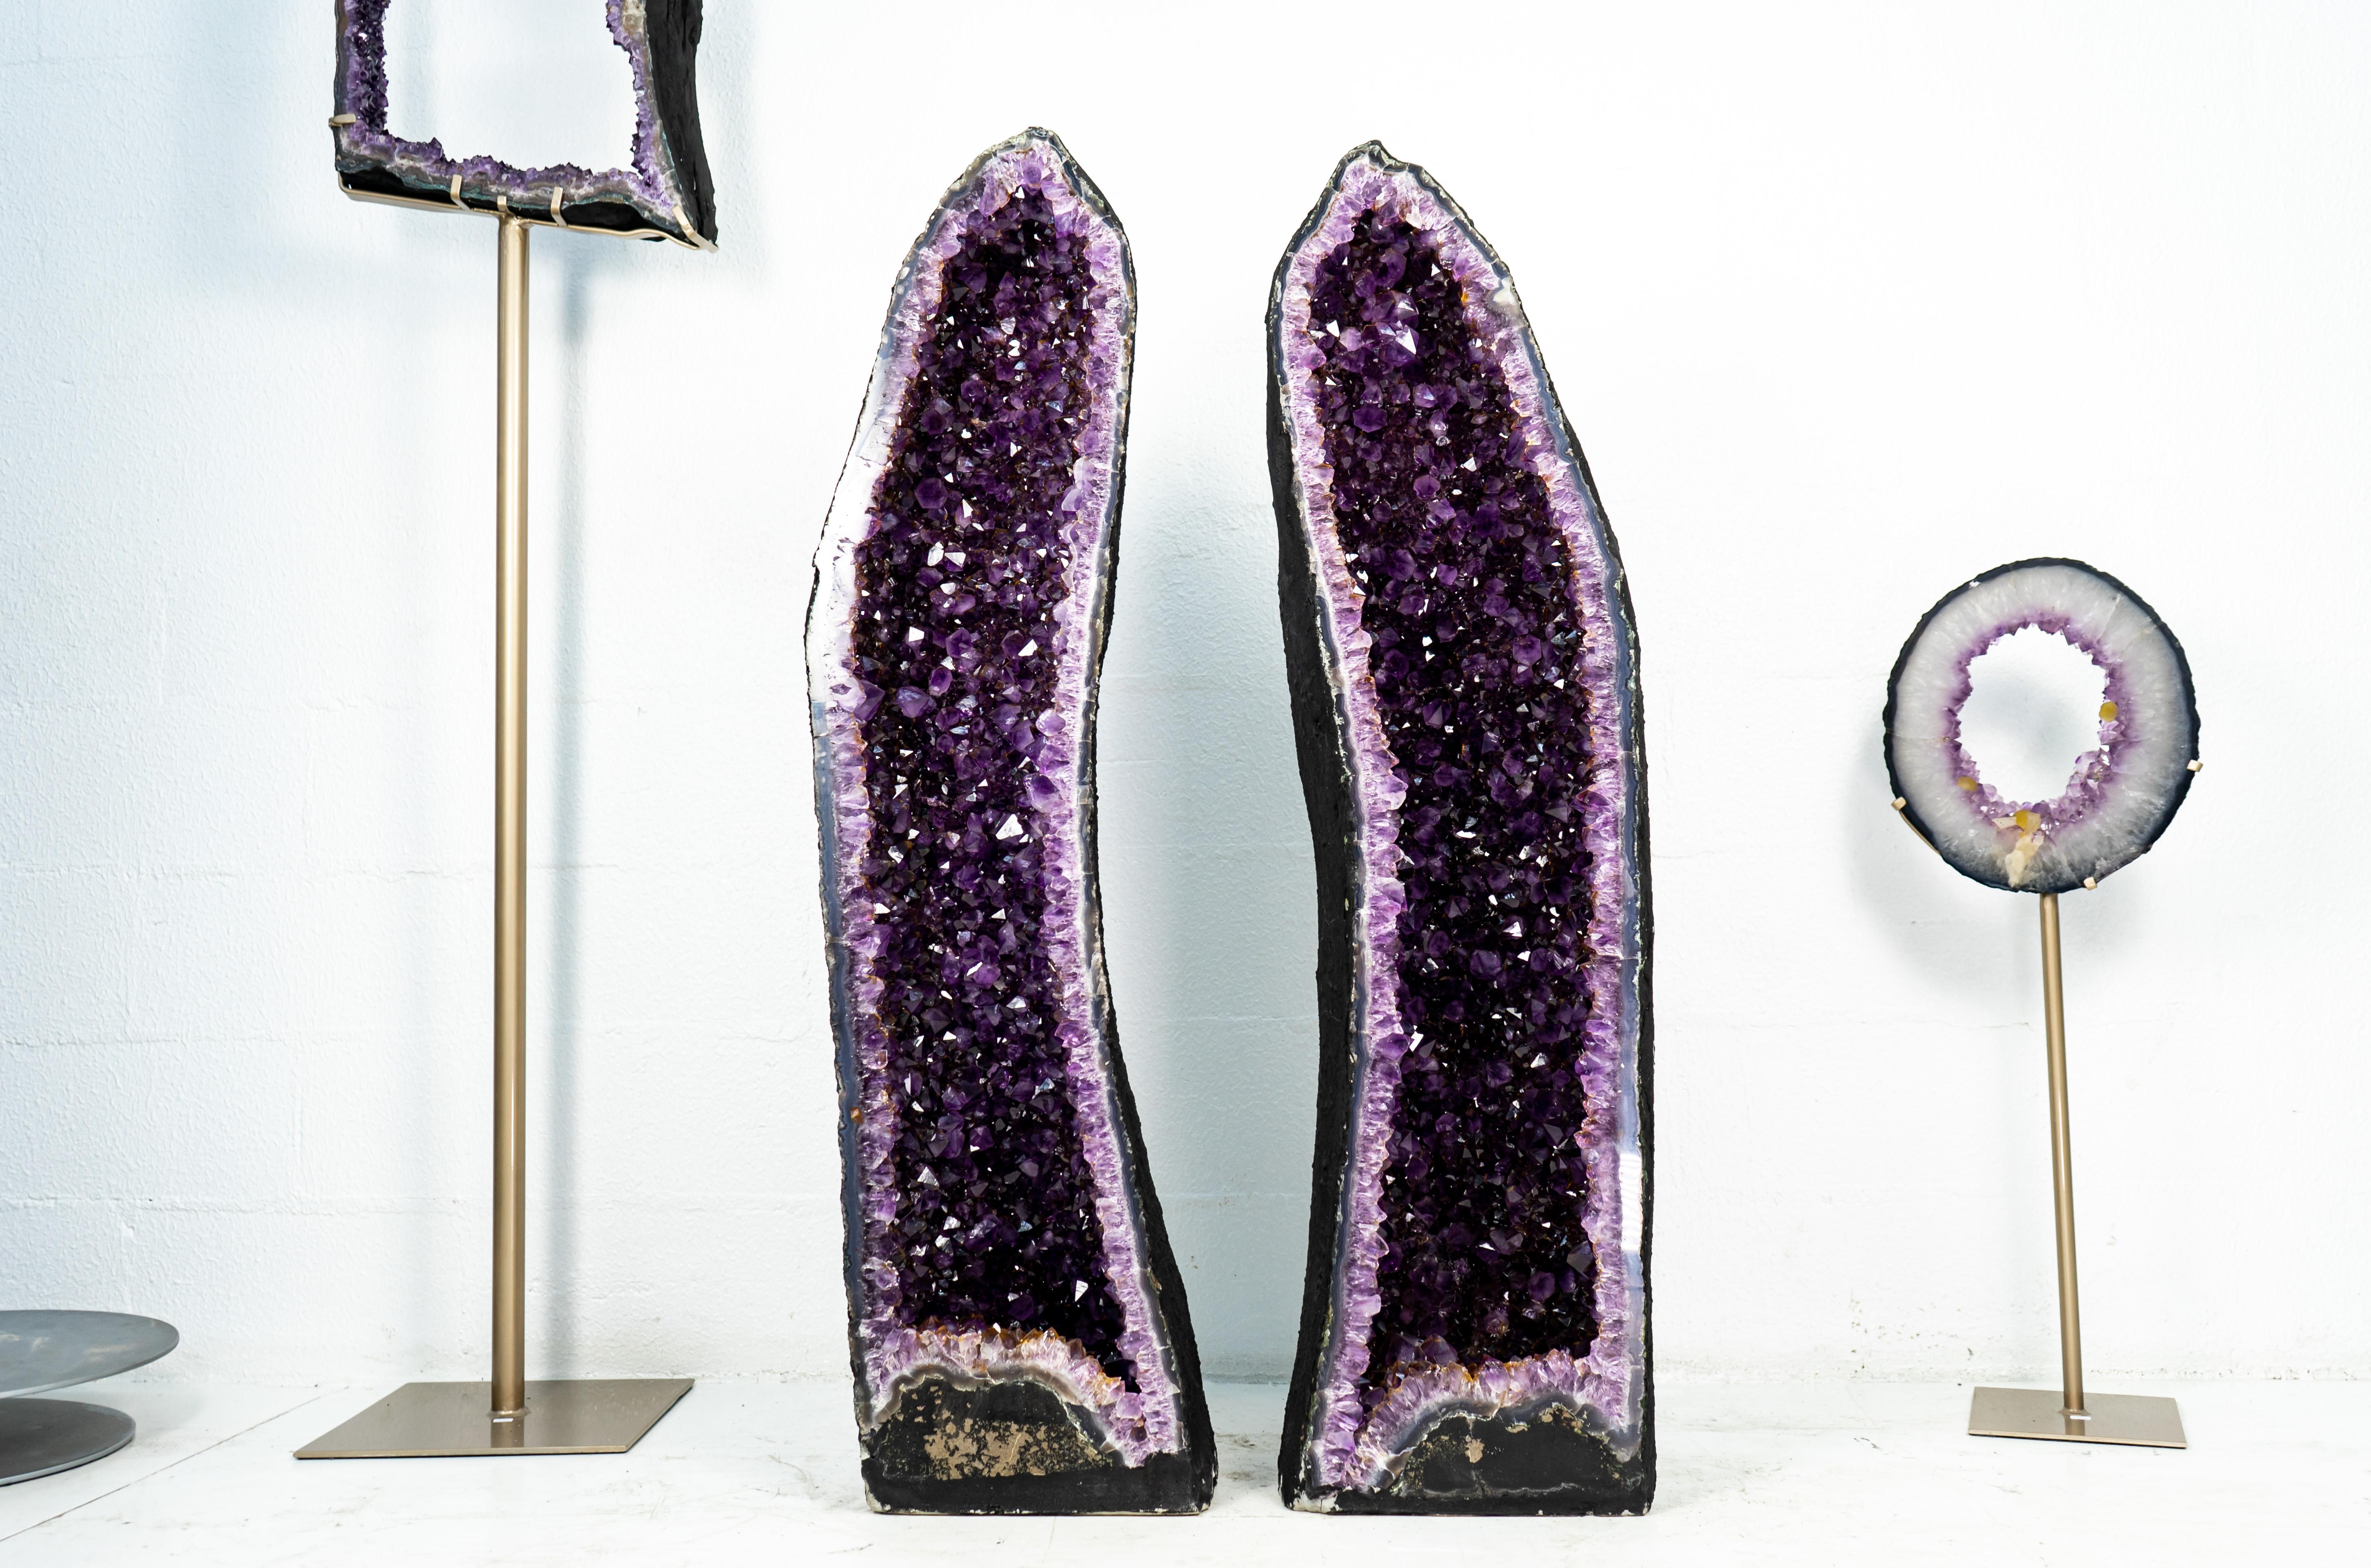 A pair of tall Amethyst Geodes with gorgeous aesthetics, these AAA Amethysts are ready to become a natural form of art to accentuate the space in your home or office decor or become a statement piece in your collection.

Bookmatching, both sides